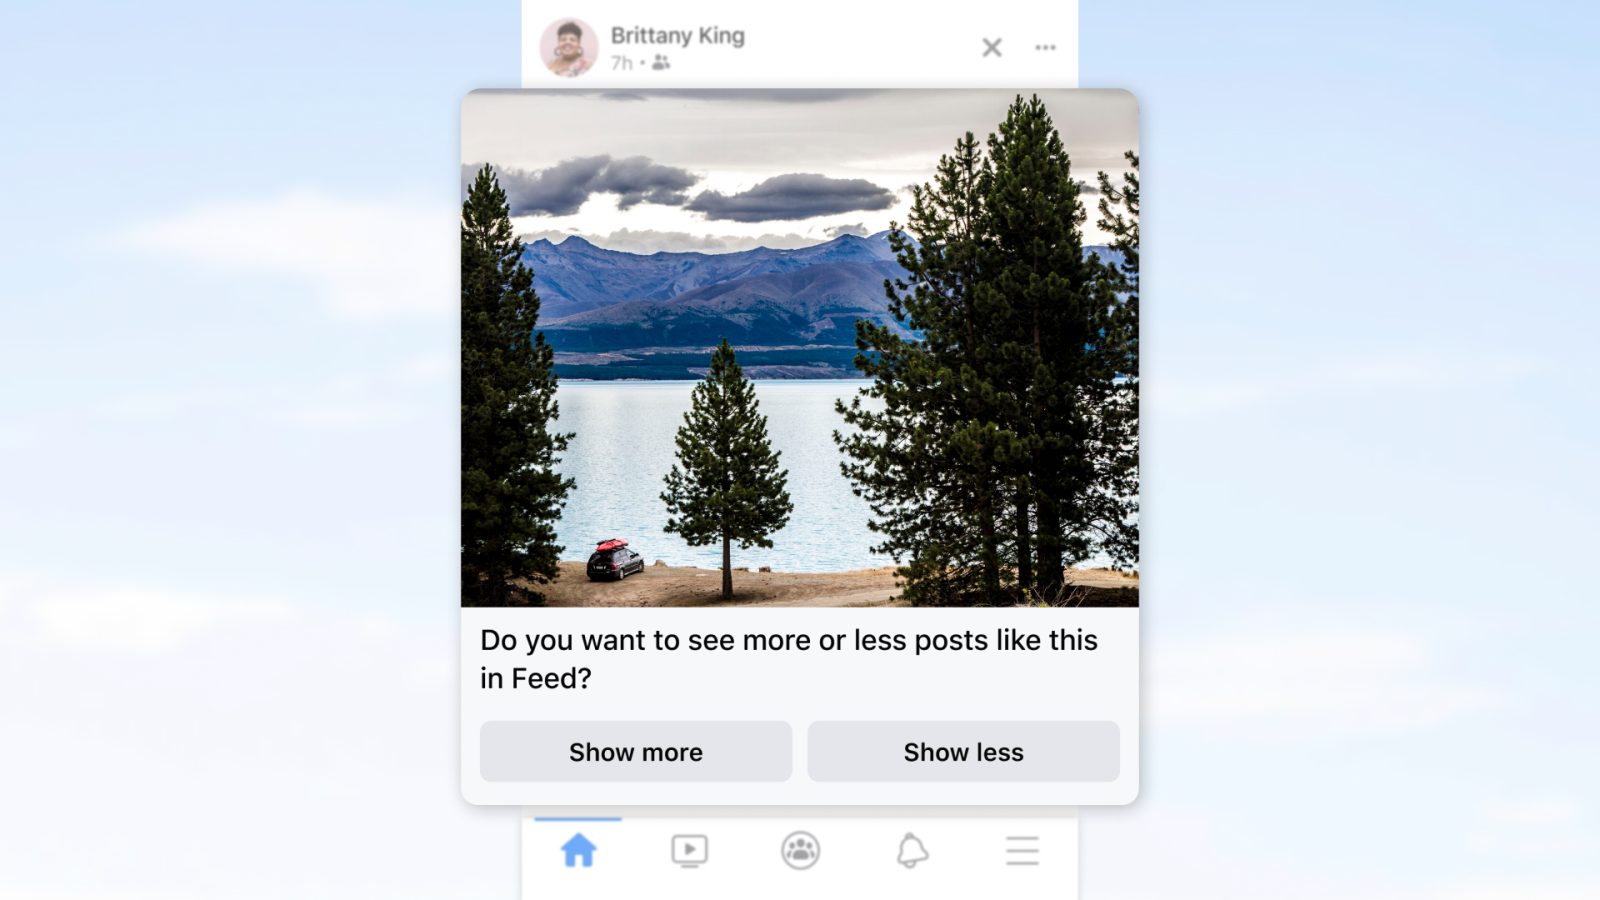 Facebook is making it easier for users to decide what content they want to see in their feed